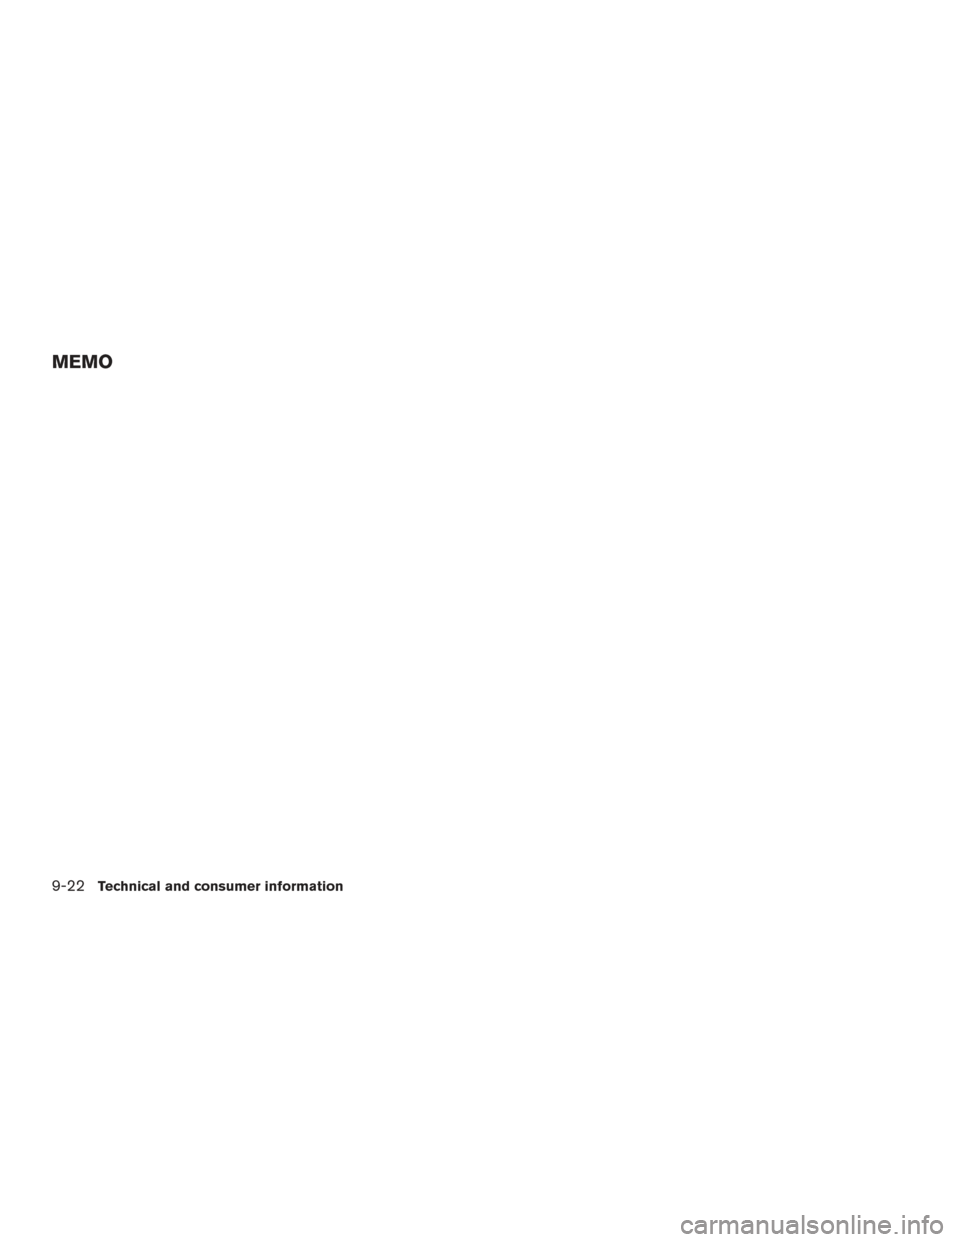 NISSAN ALTIMA 2015 L33 / 5.G Owners Manual MEMO
9-22Technical and consumer information 